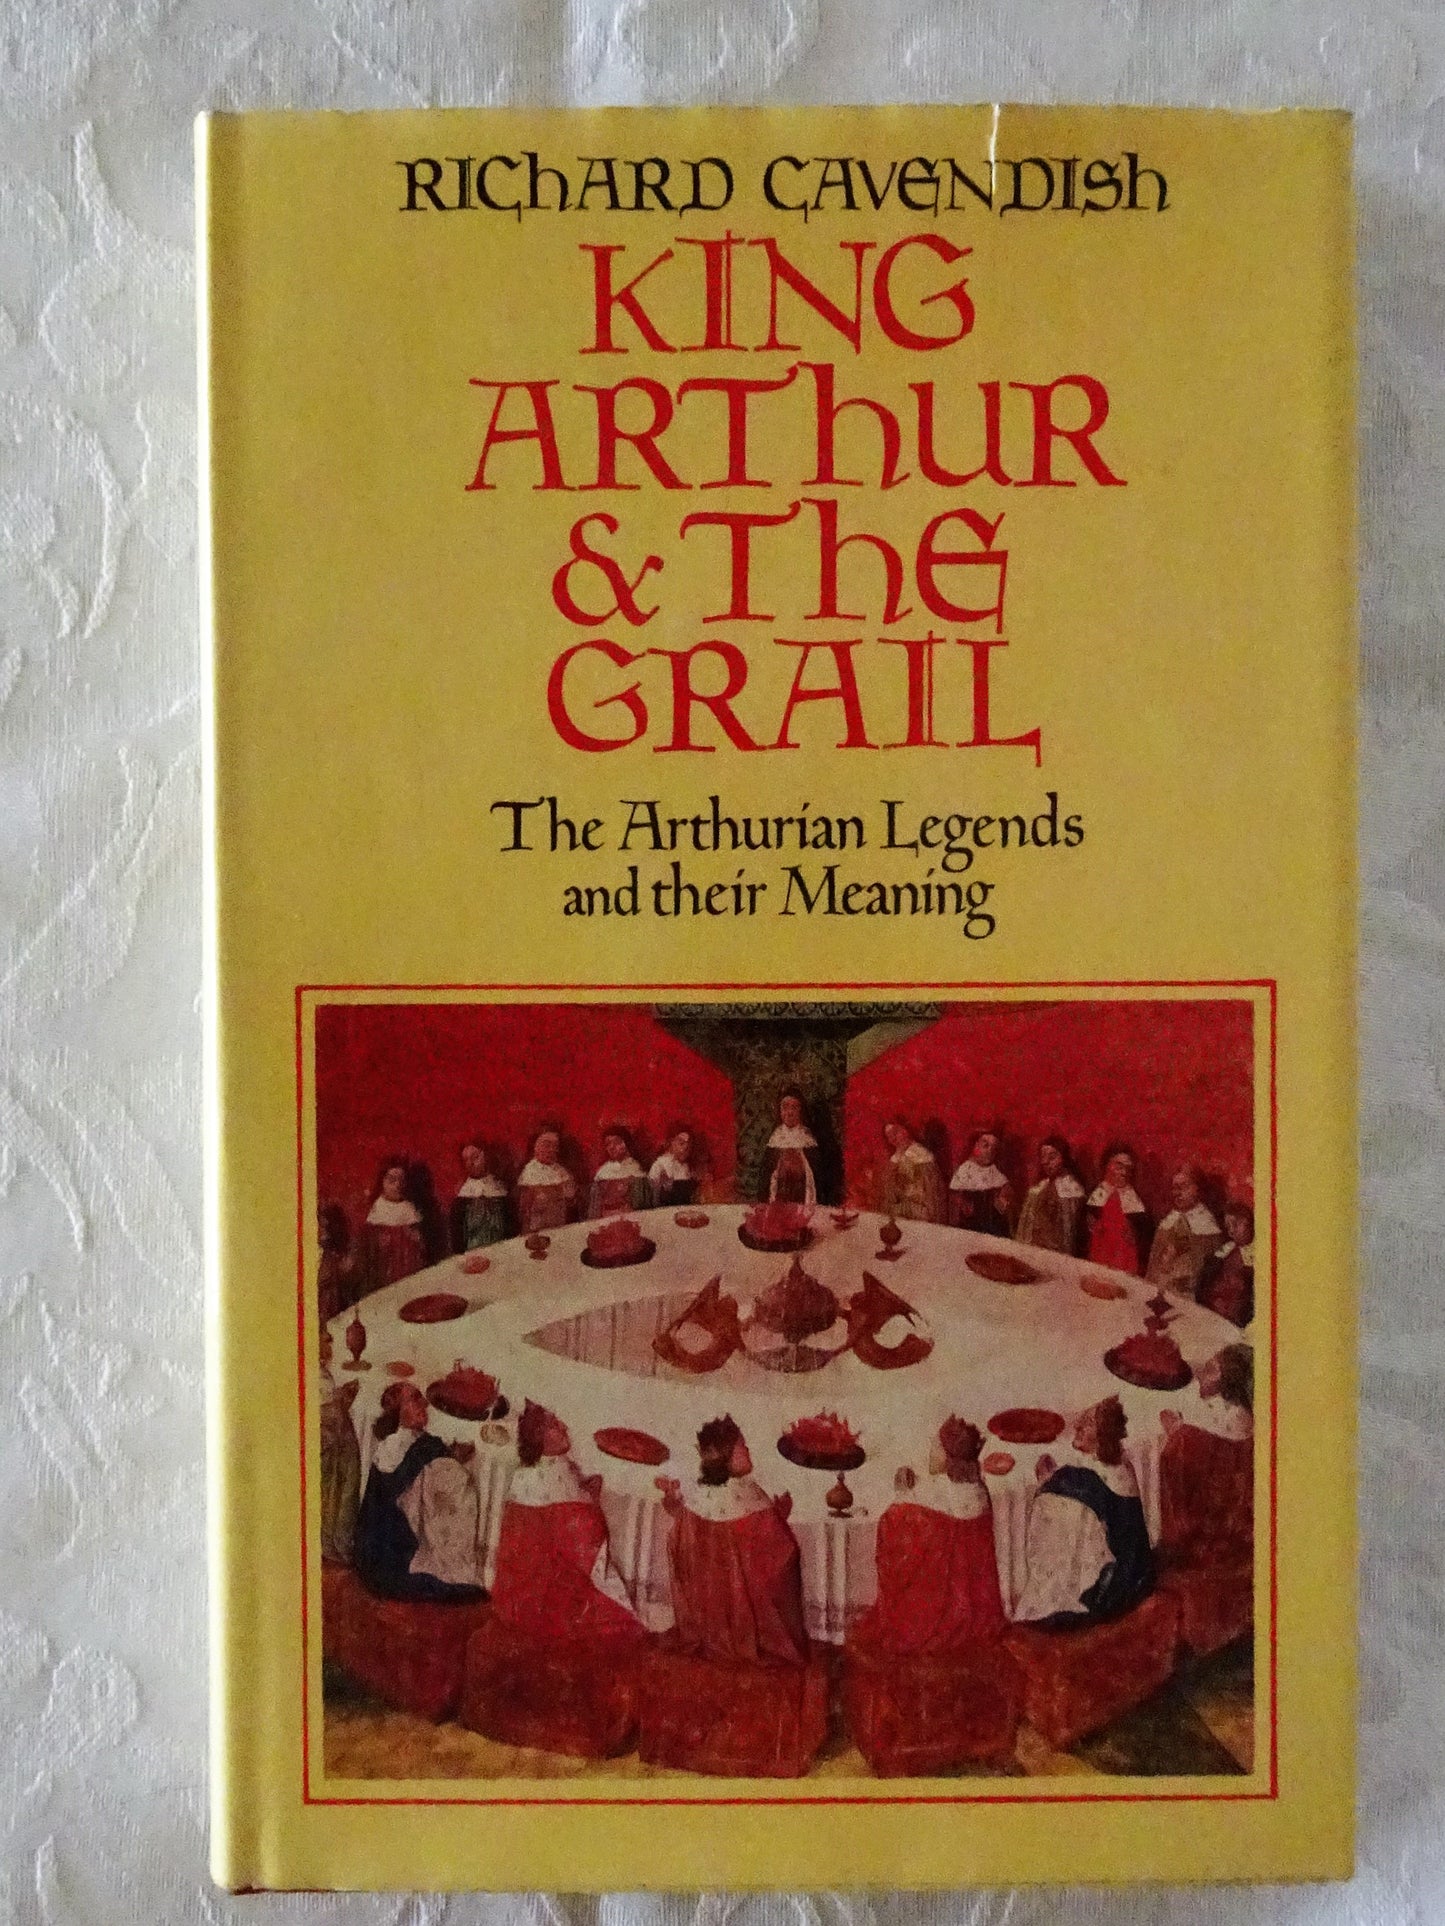 King Arthur & The Grail  The Arthurian Legends and their Meaning  by Richard Cavendish